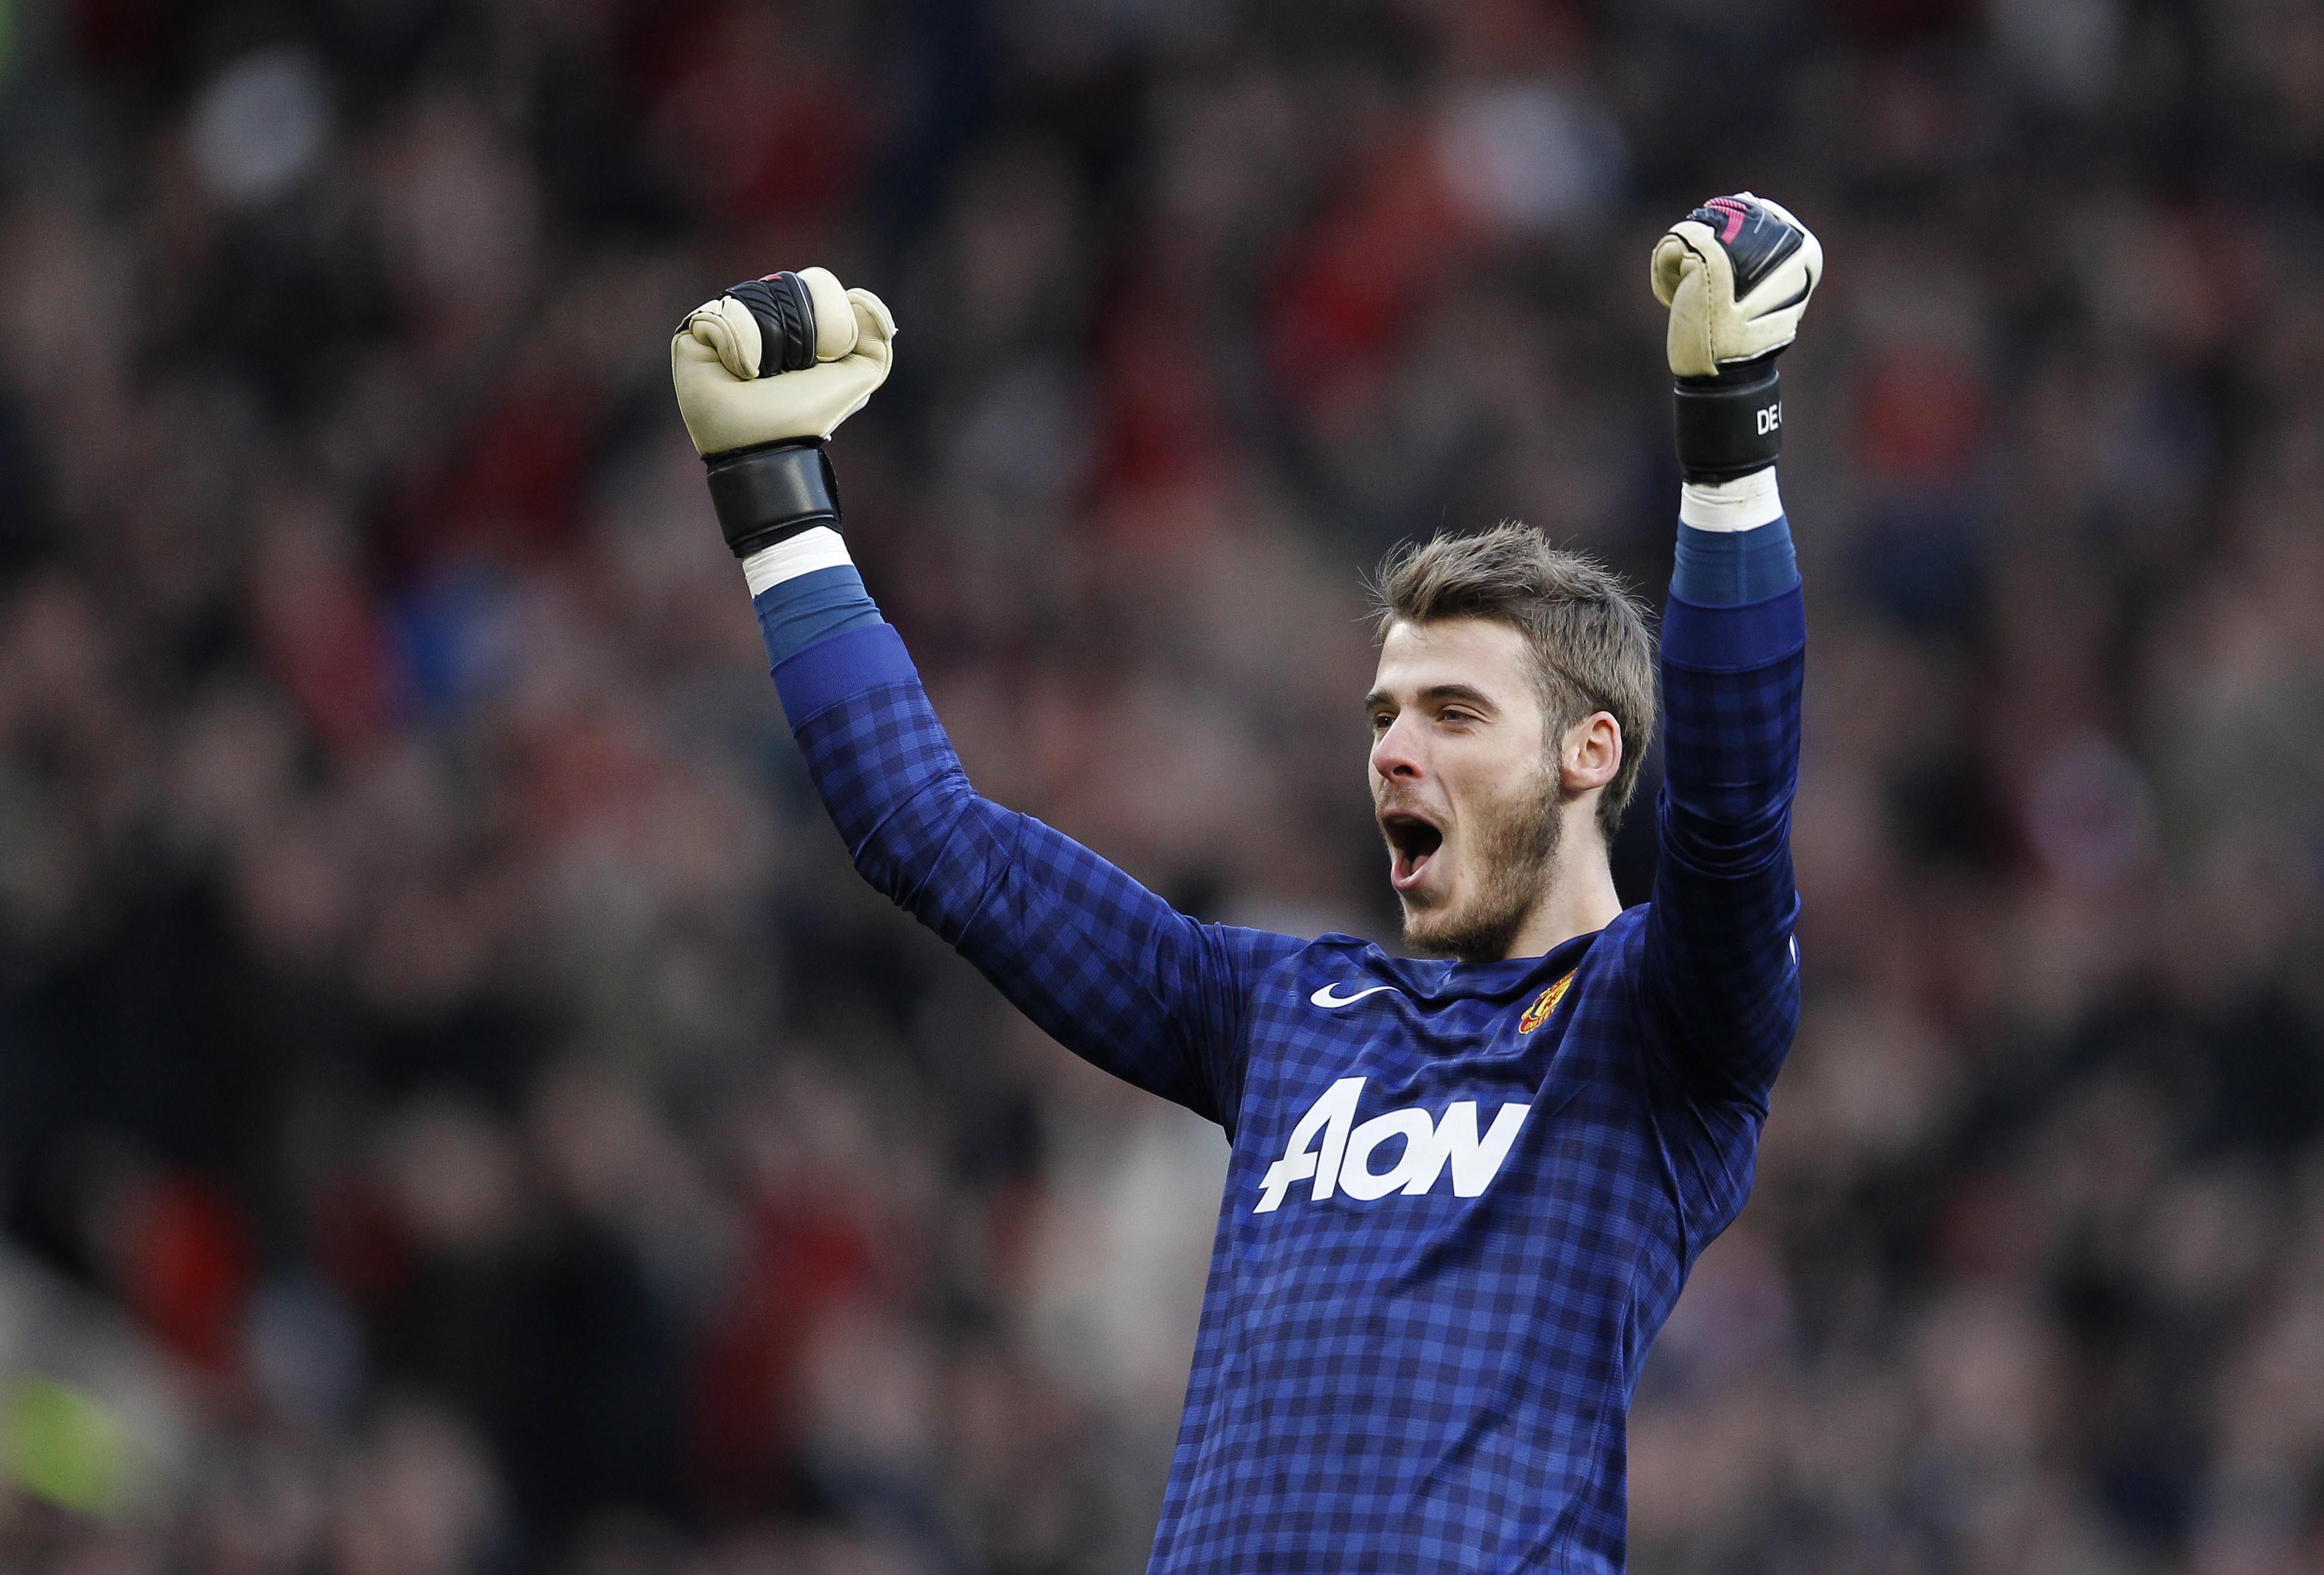 Manchester United David De Gea after the game wallpapers and ...